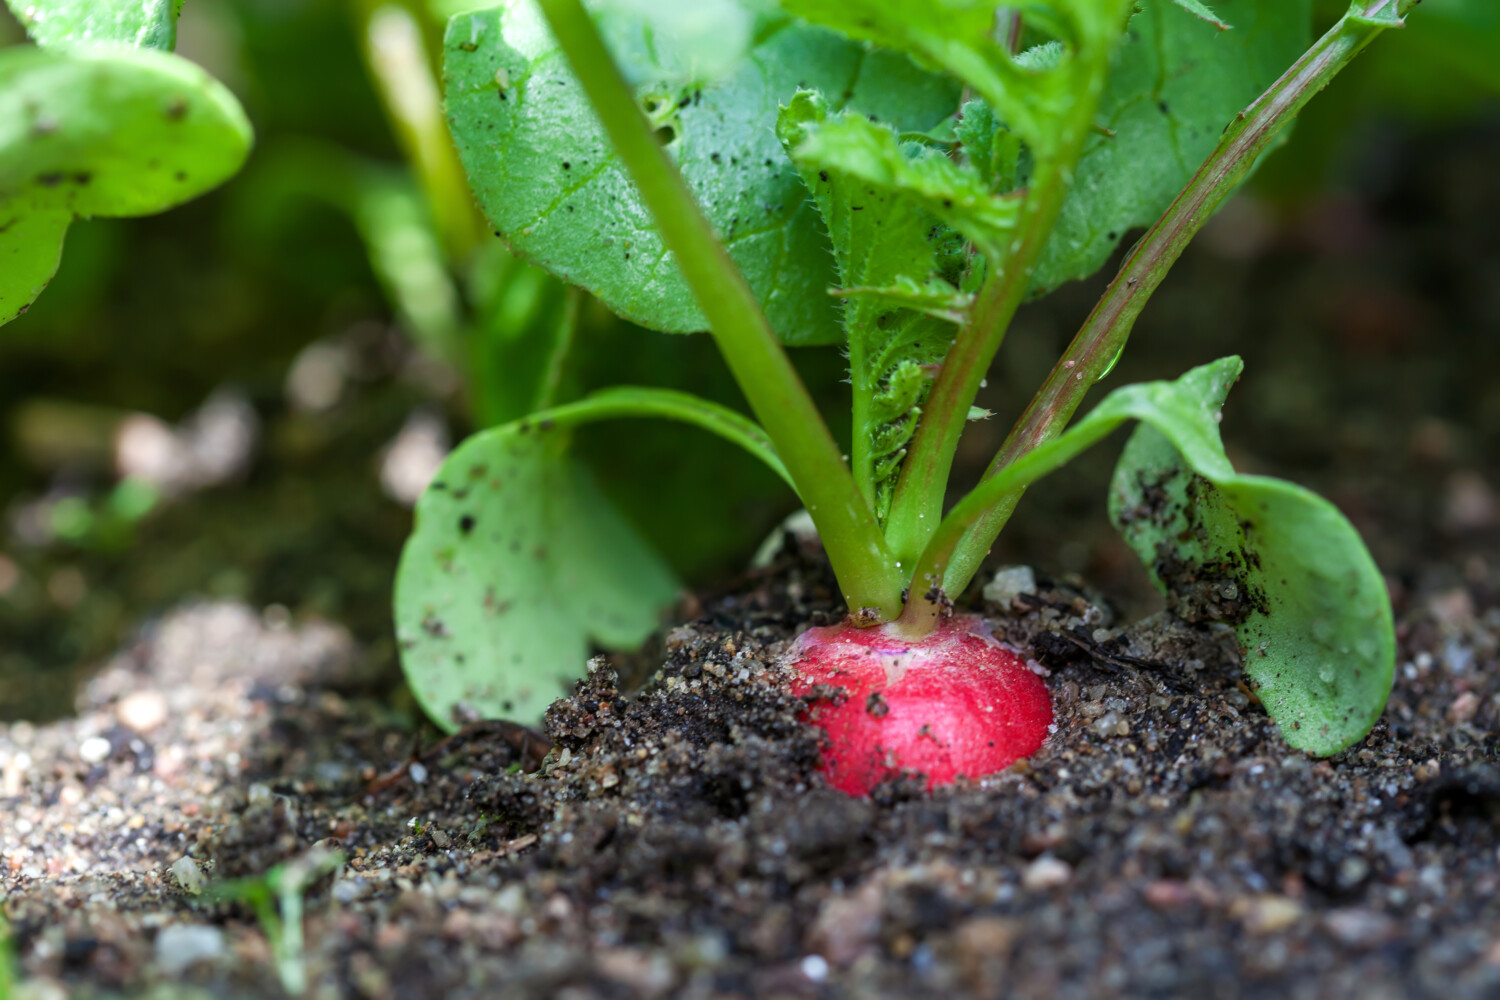 Red radishes grow in garden